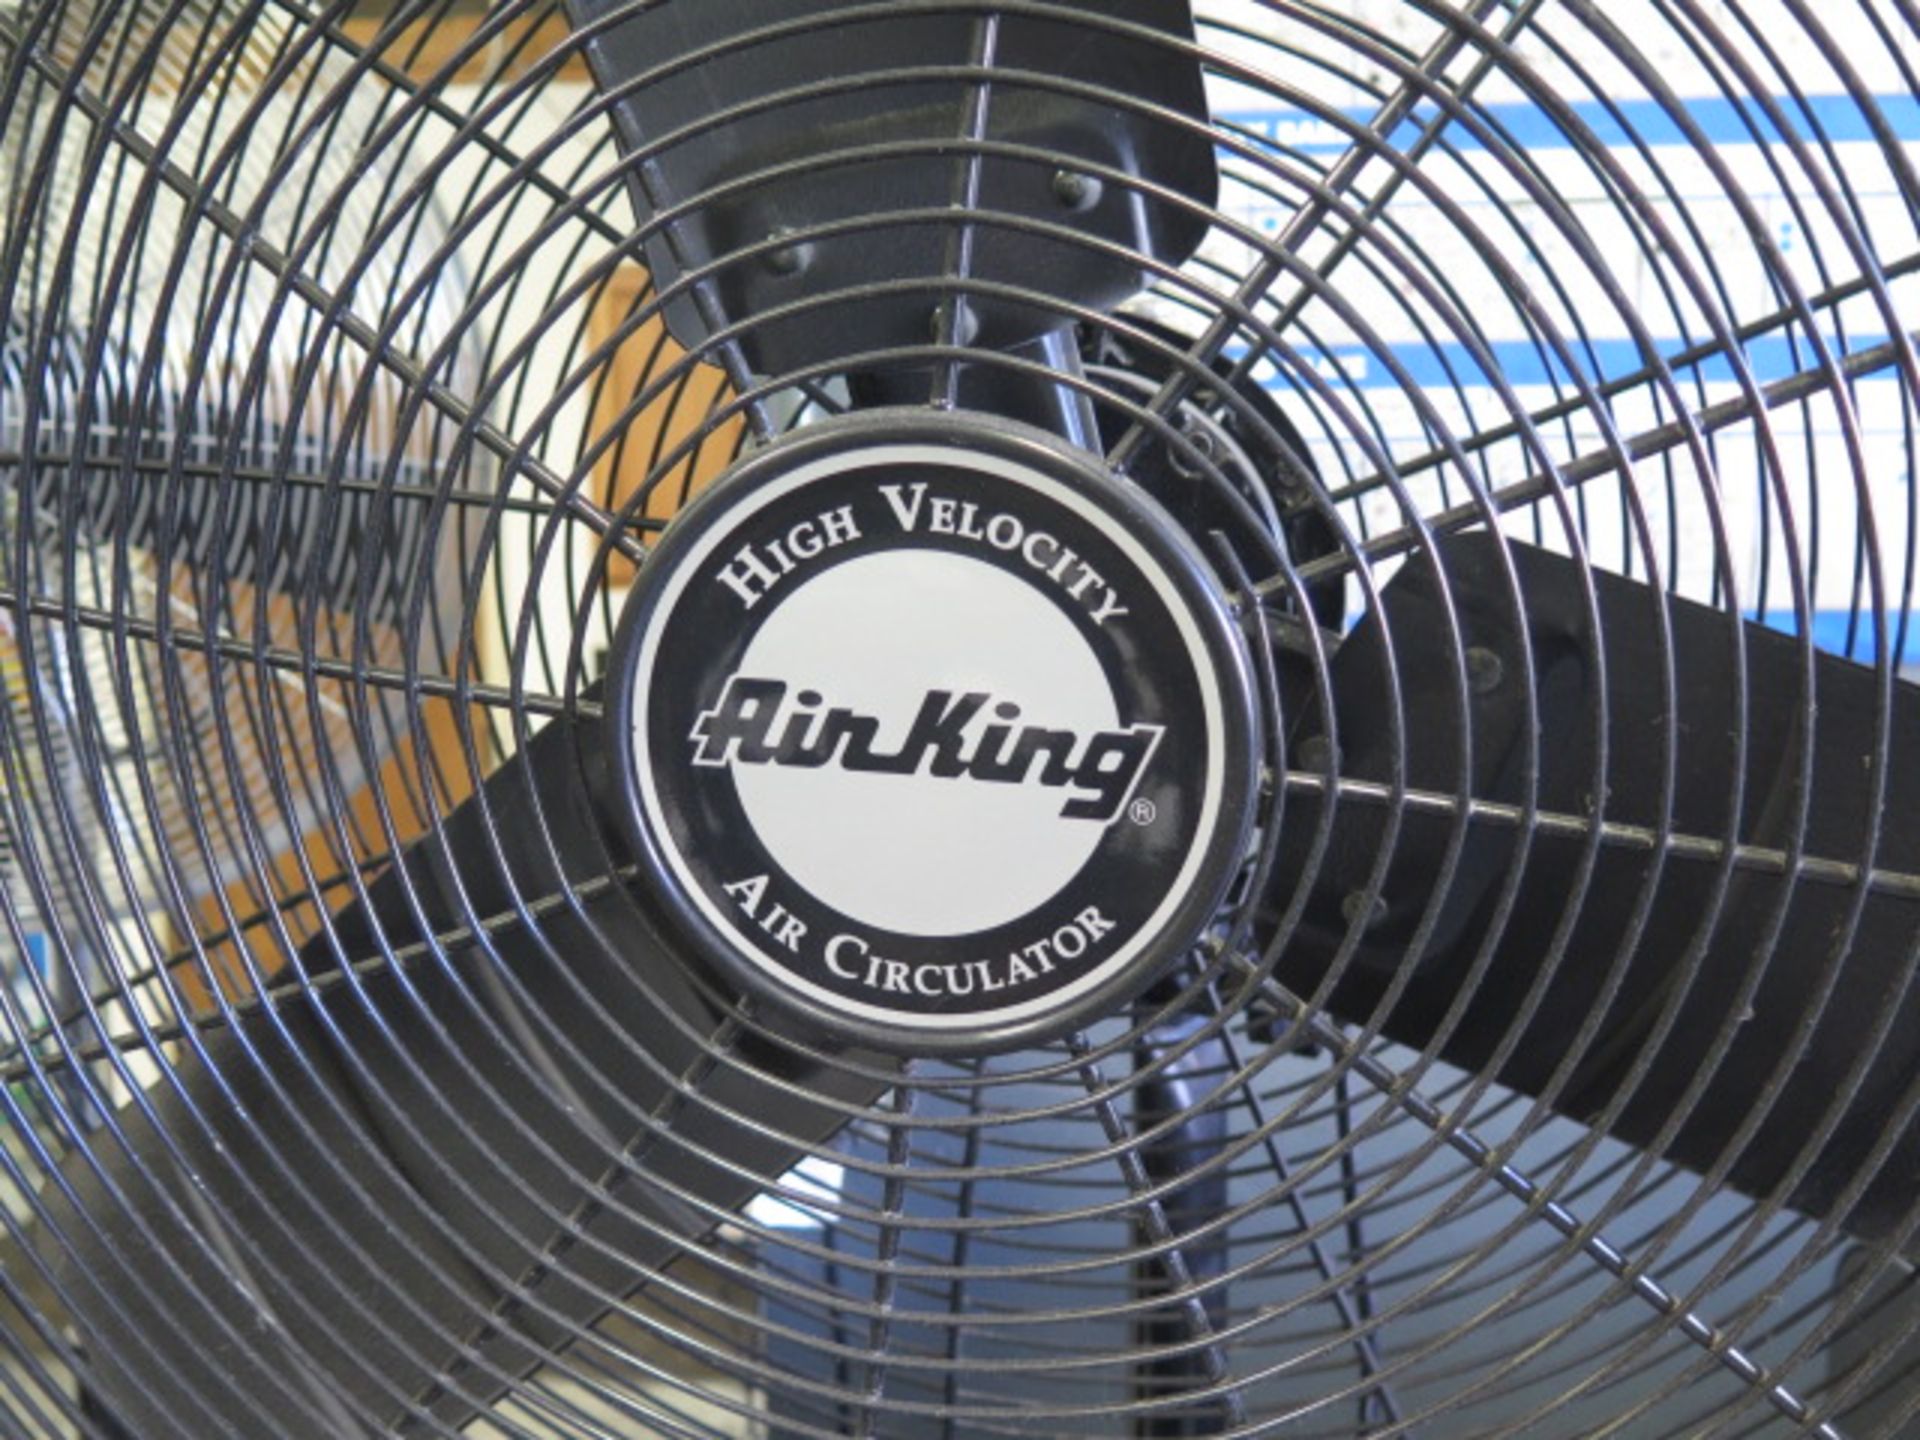 Shop Fans (3) (SOLD AS-IS - NO WARRANTY) - Image 3 of 7